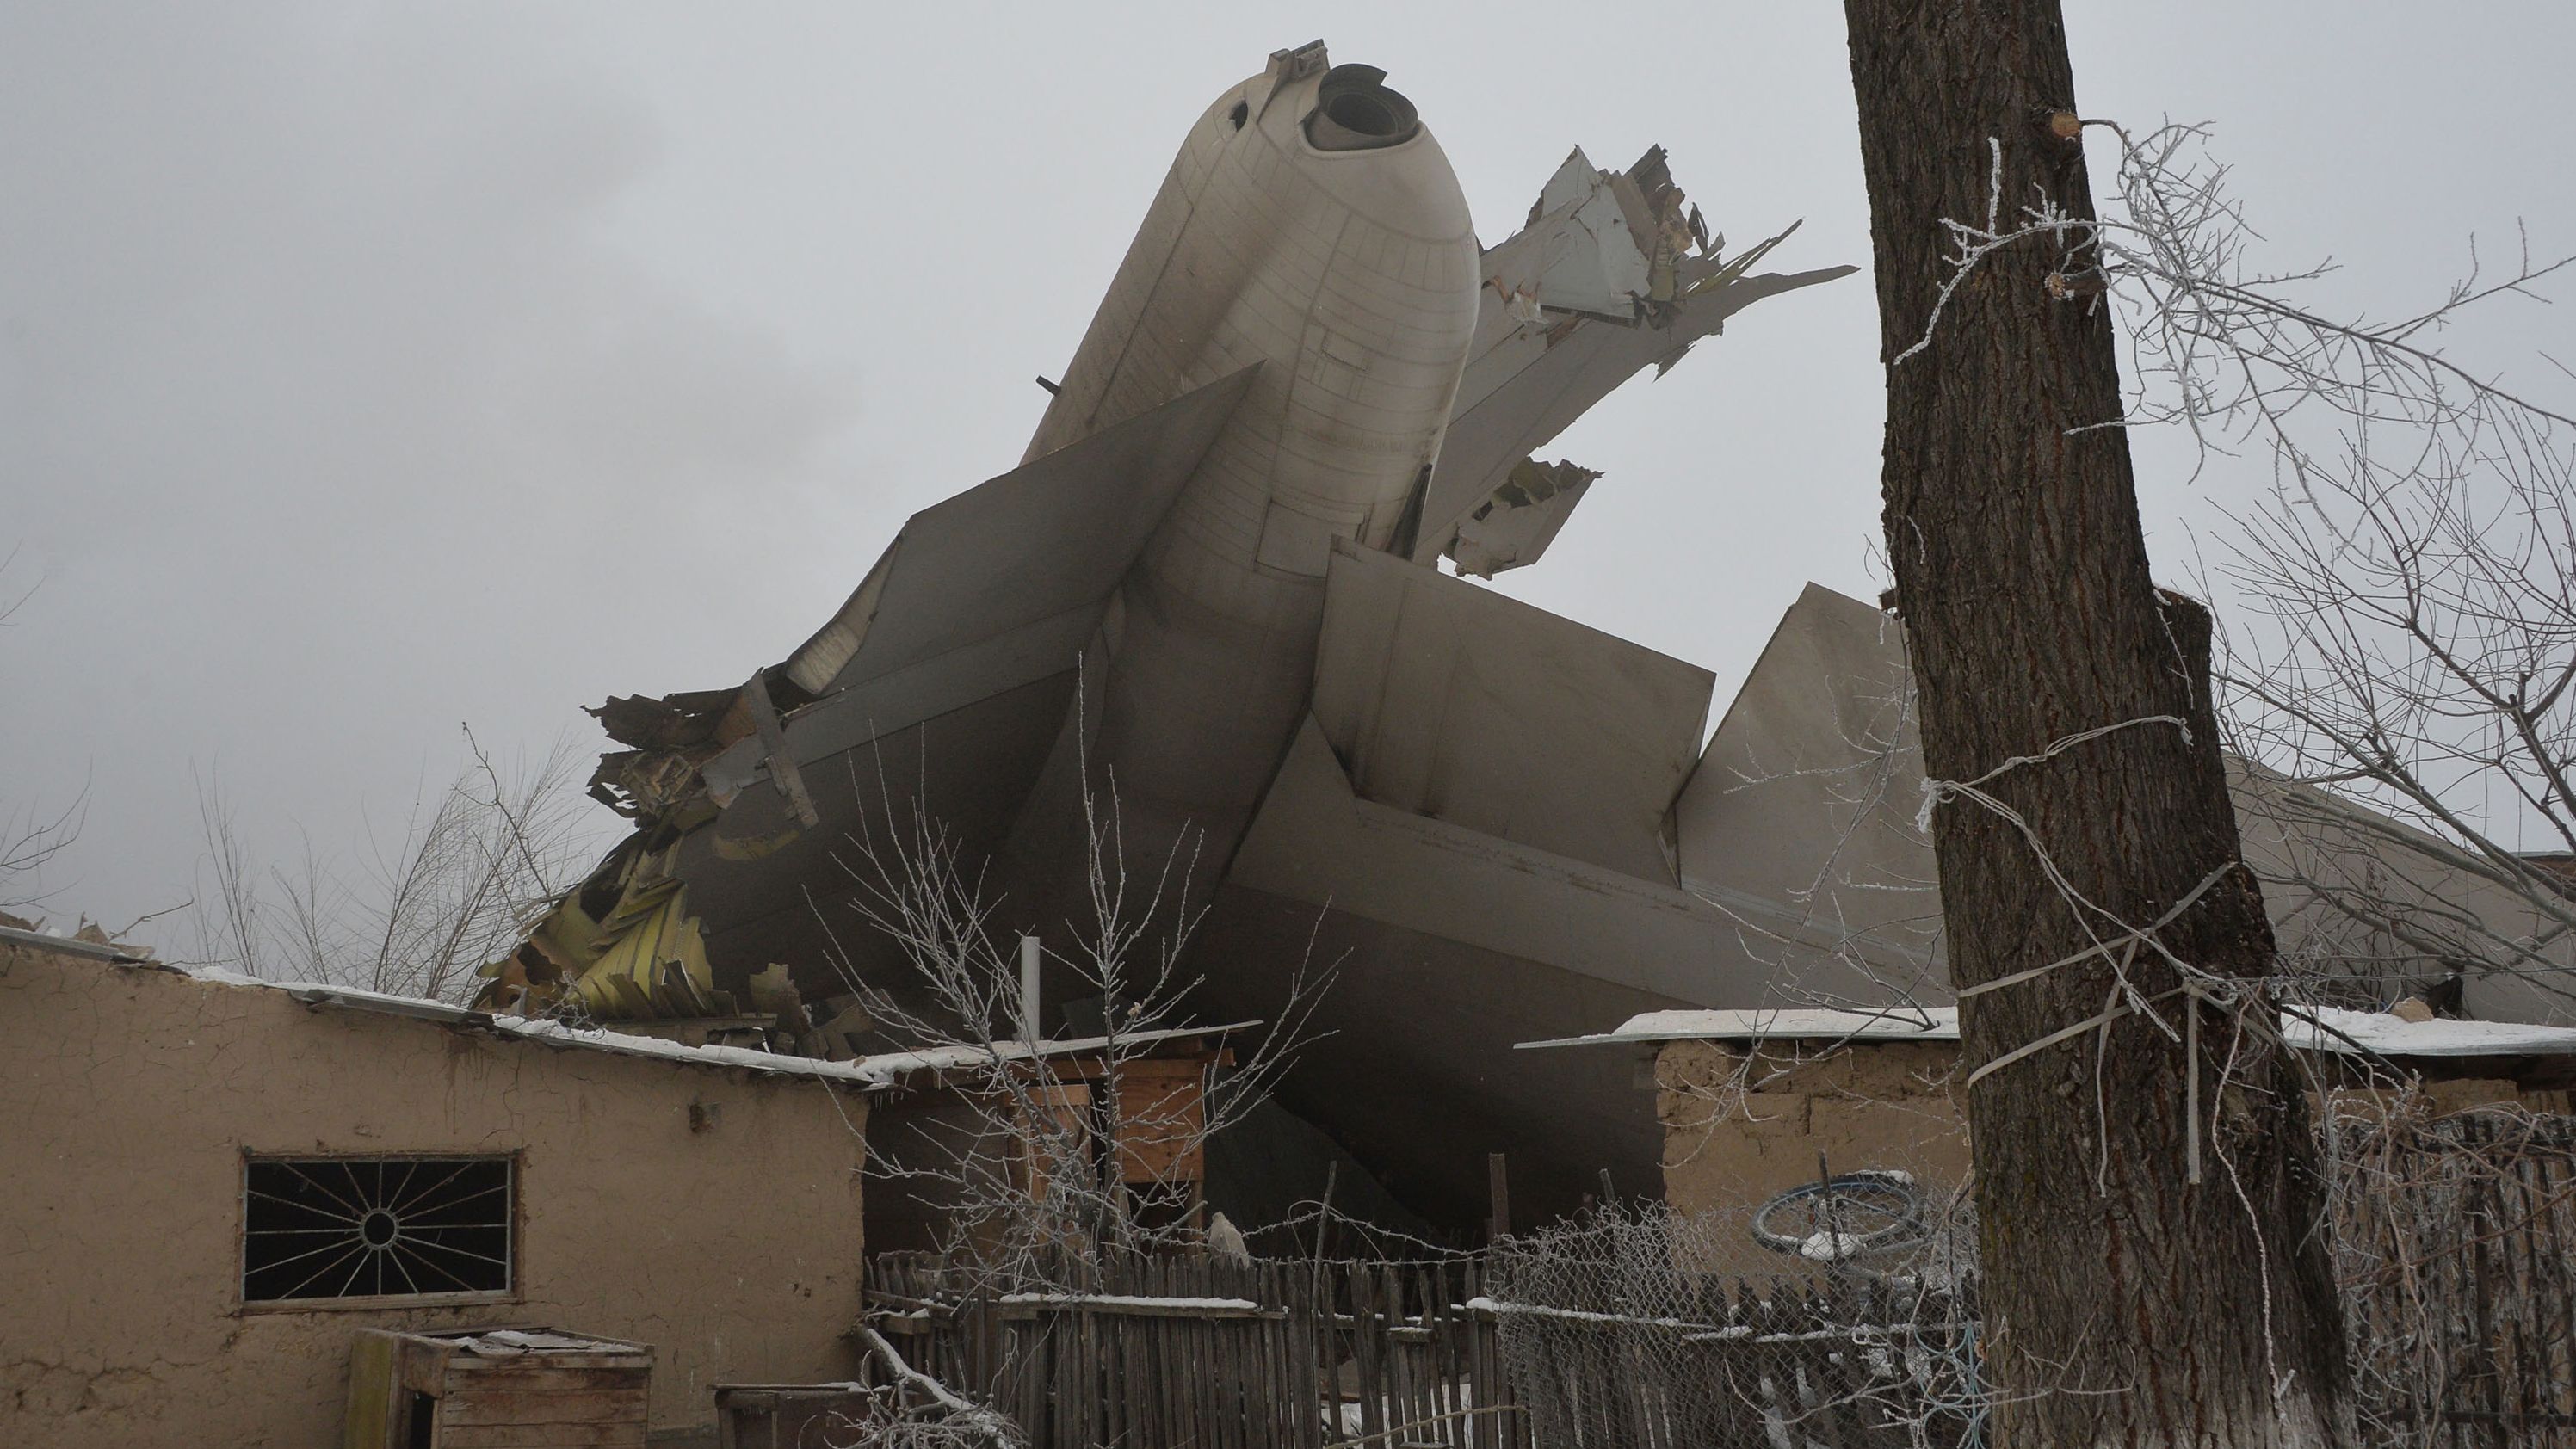 The wreckage of a Turkish cargo plane is seen after it crashed in a village outside Bishkek.